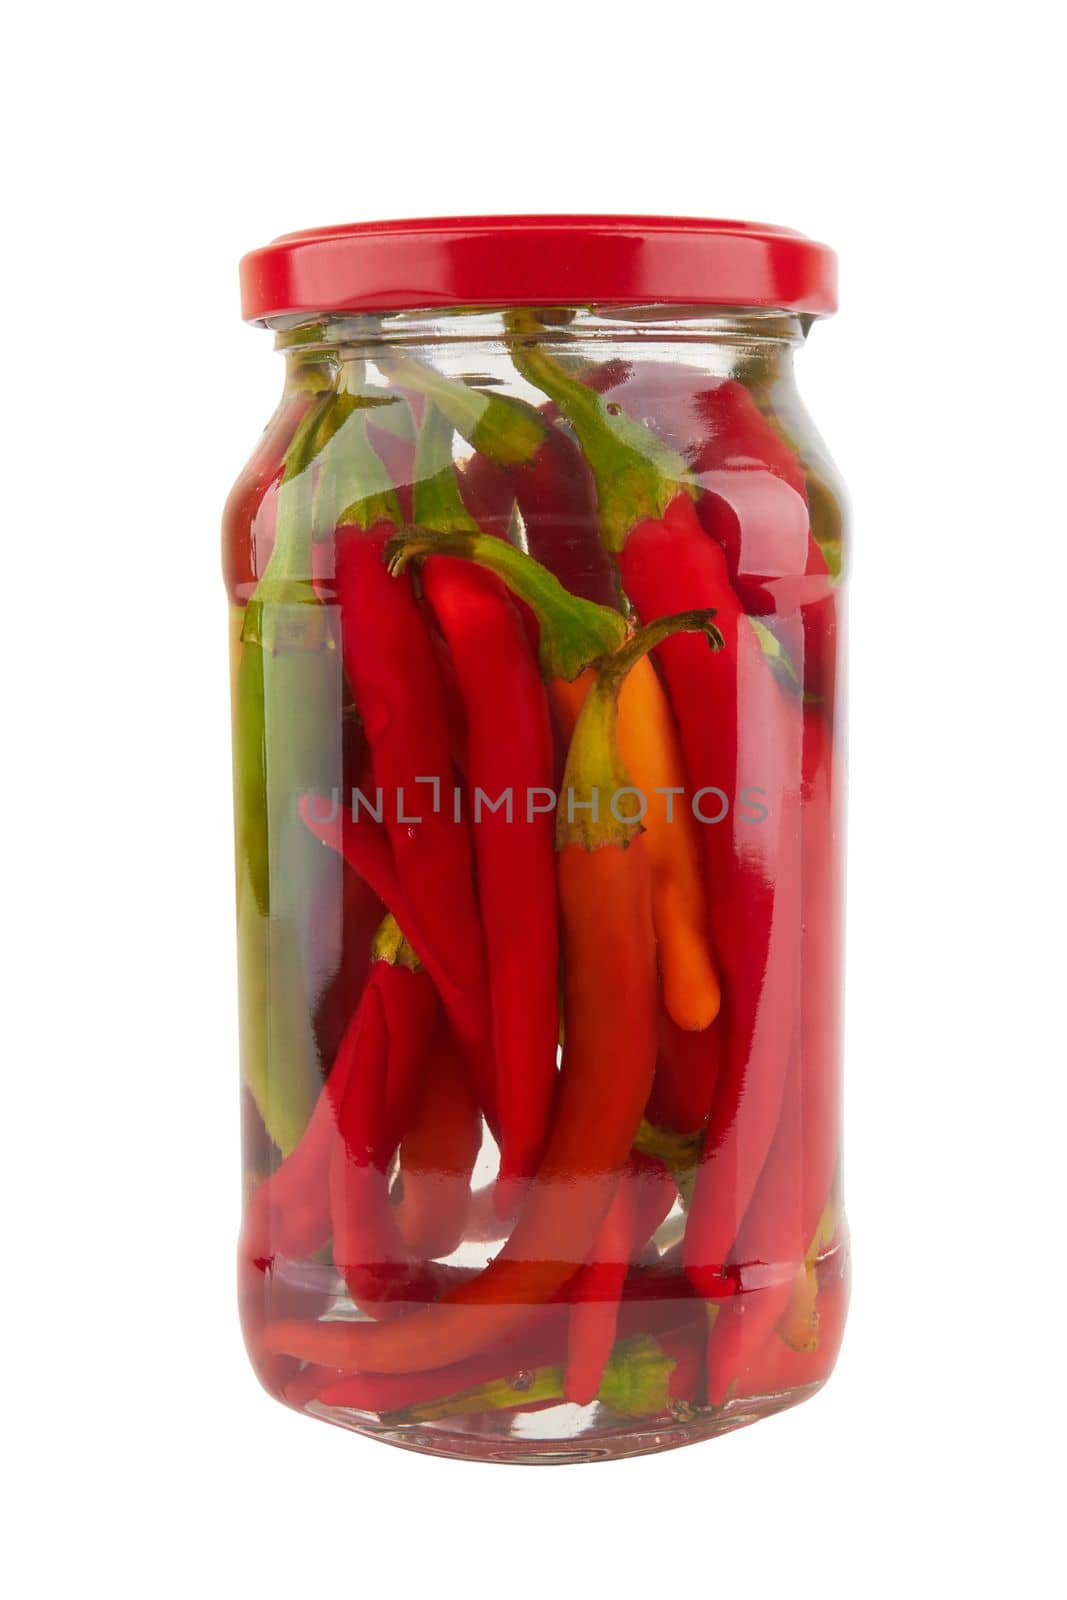 Canned hot peppers  by pioneer111